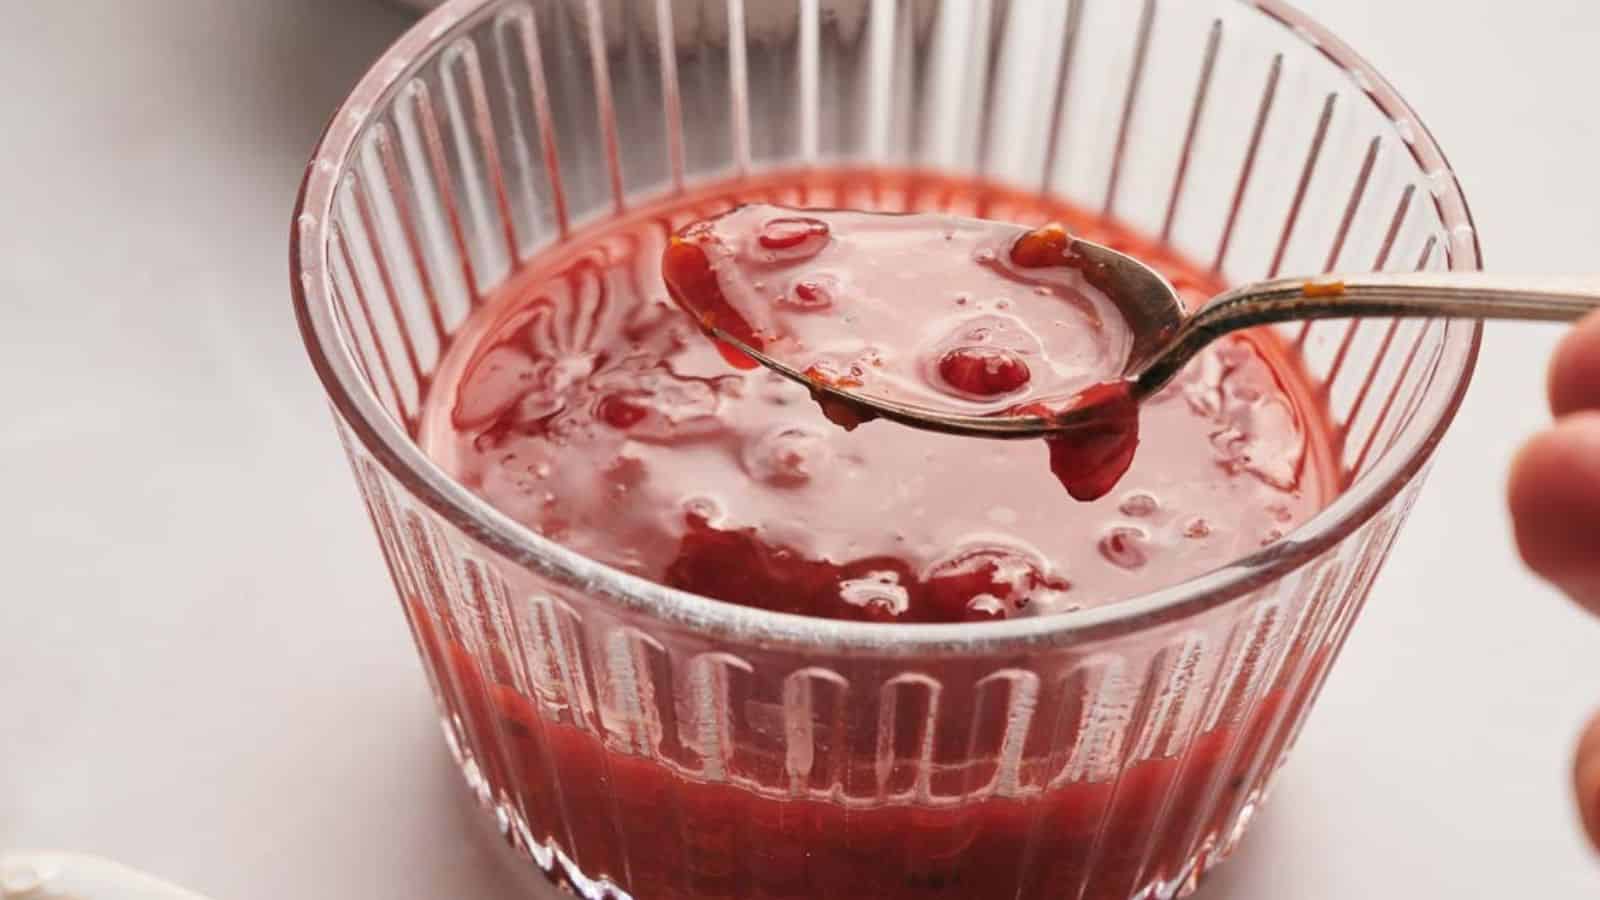 Someone spooning out cranberry sauce from a glass bowl.